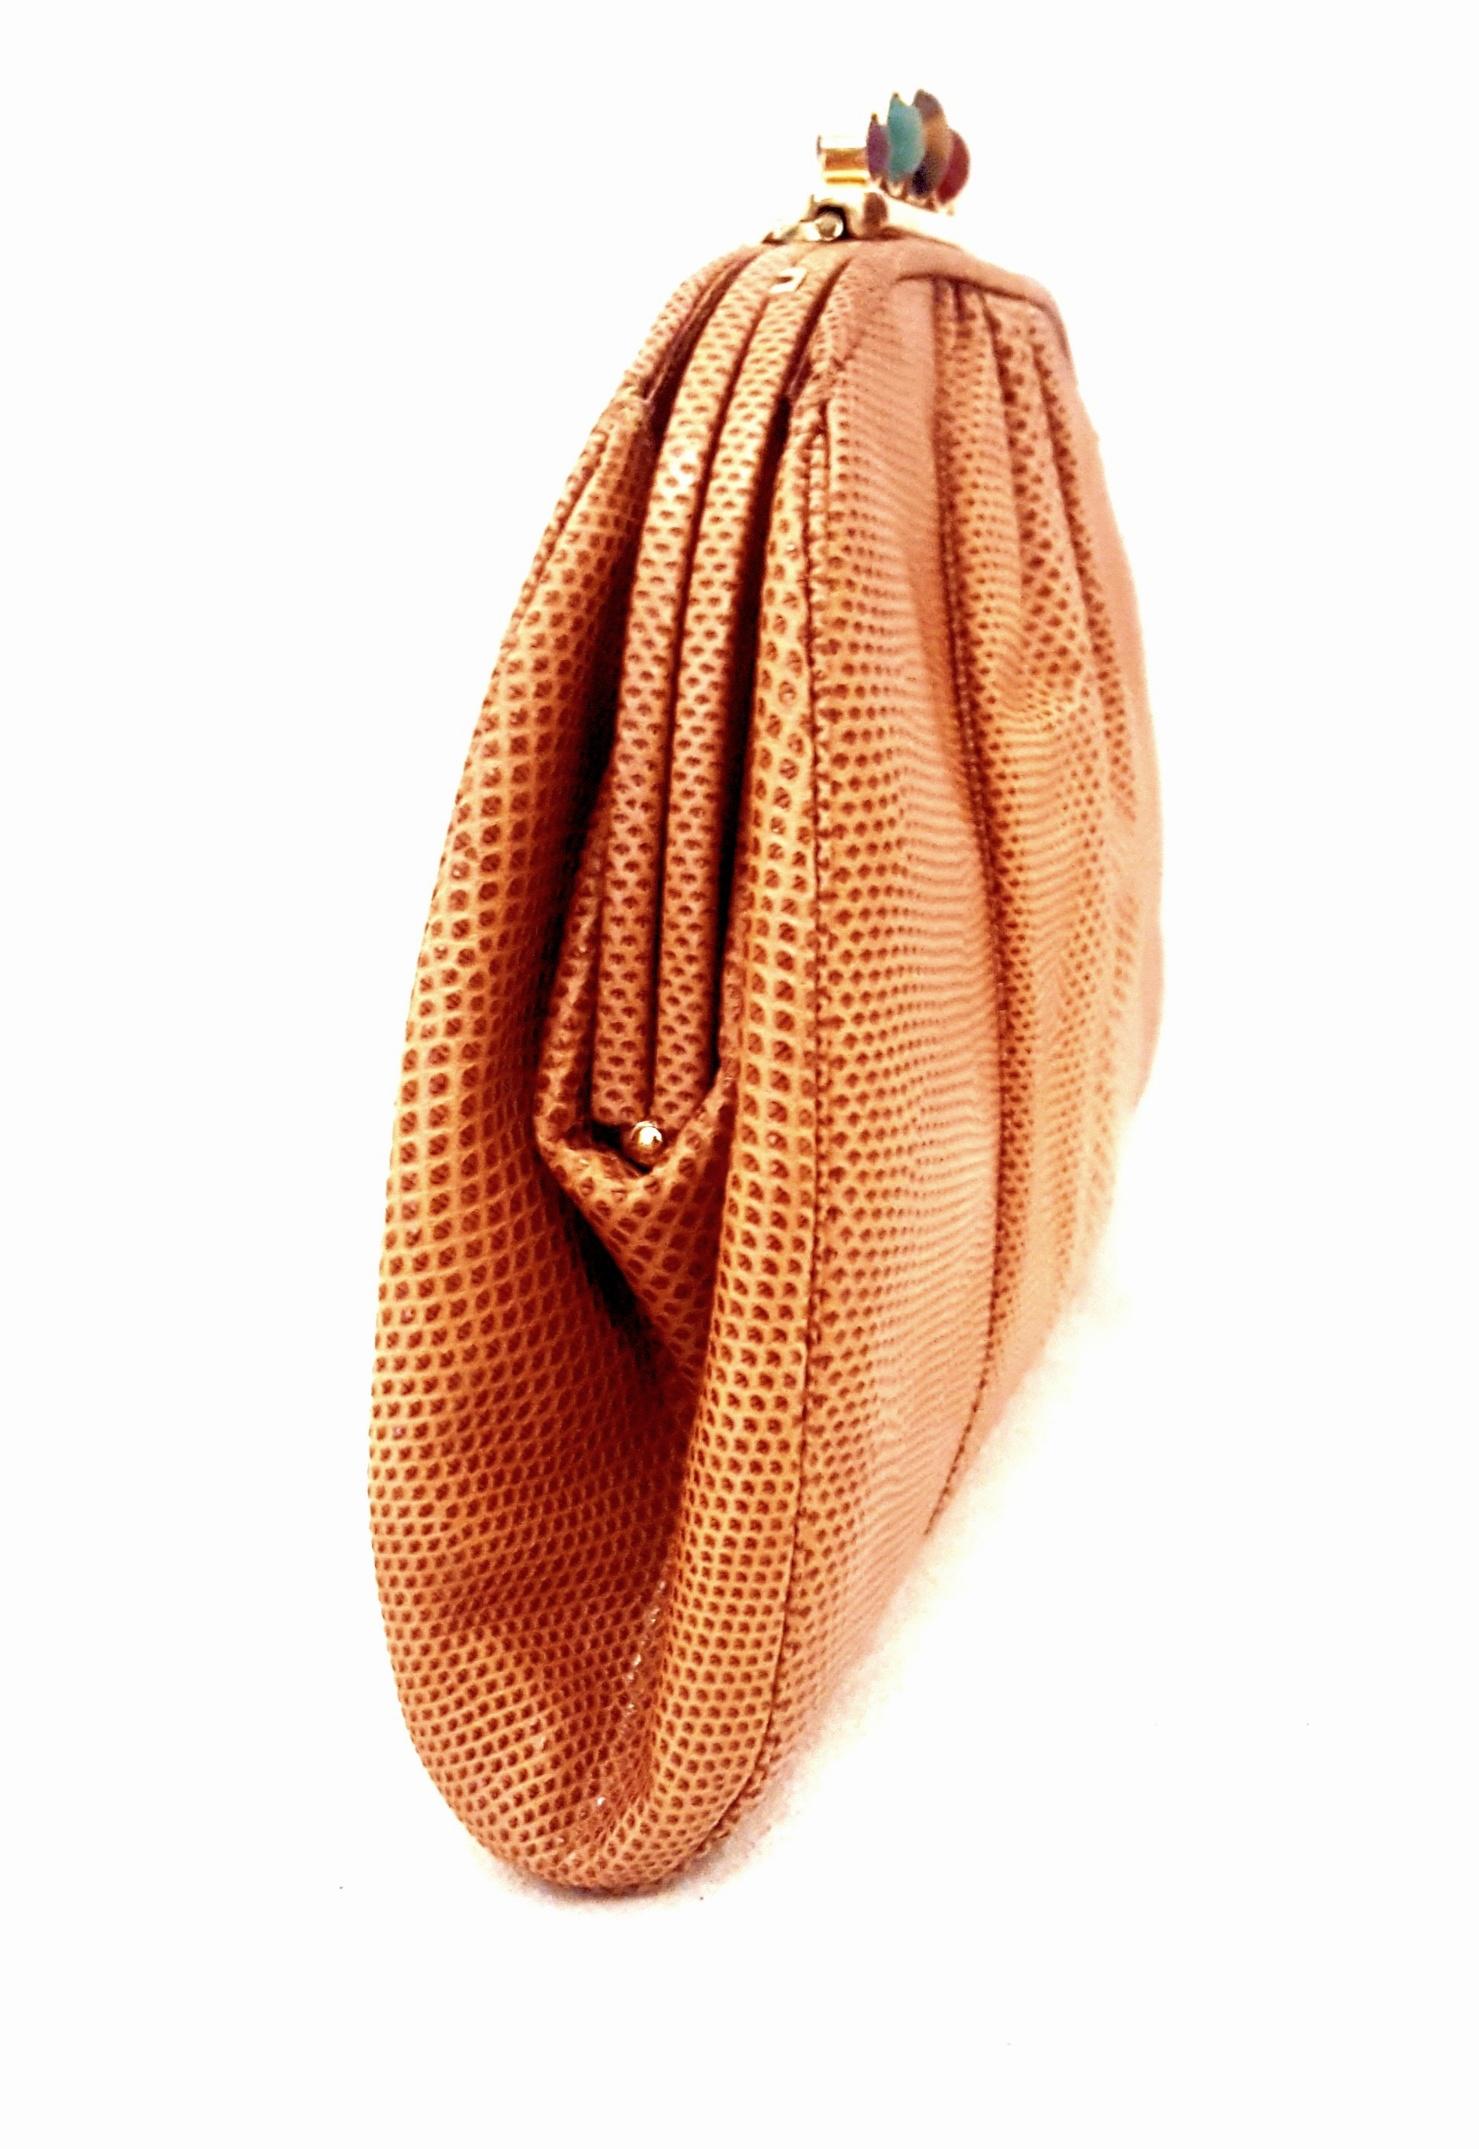 Vintage Judith Leiber jeweled closure tan lizard convertible clutch/shoulder bag is highly desired by collectors of Judith Leiber.   This bag features slightly gathered, butter soft lizard skin.  It is larger than the typical Lebeir that easily